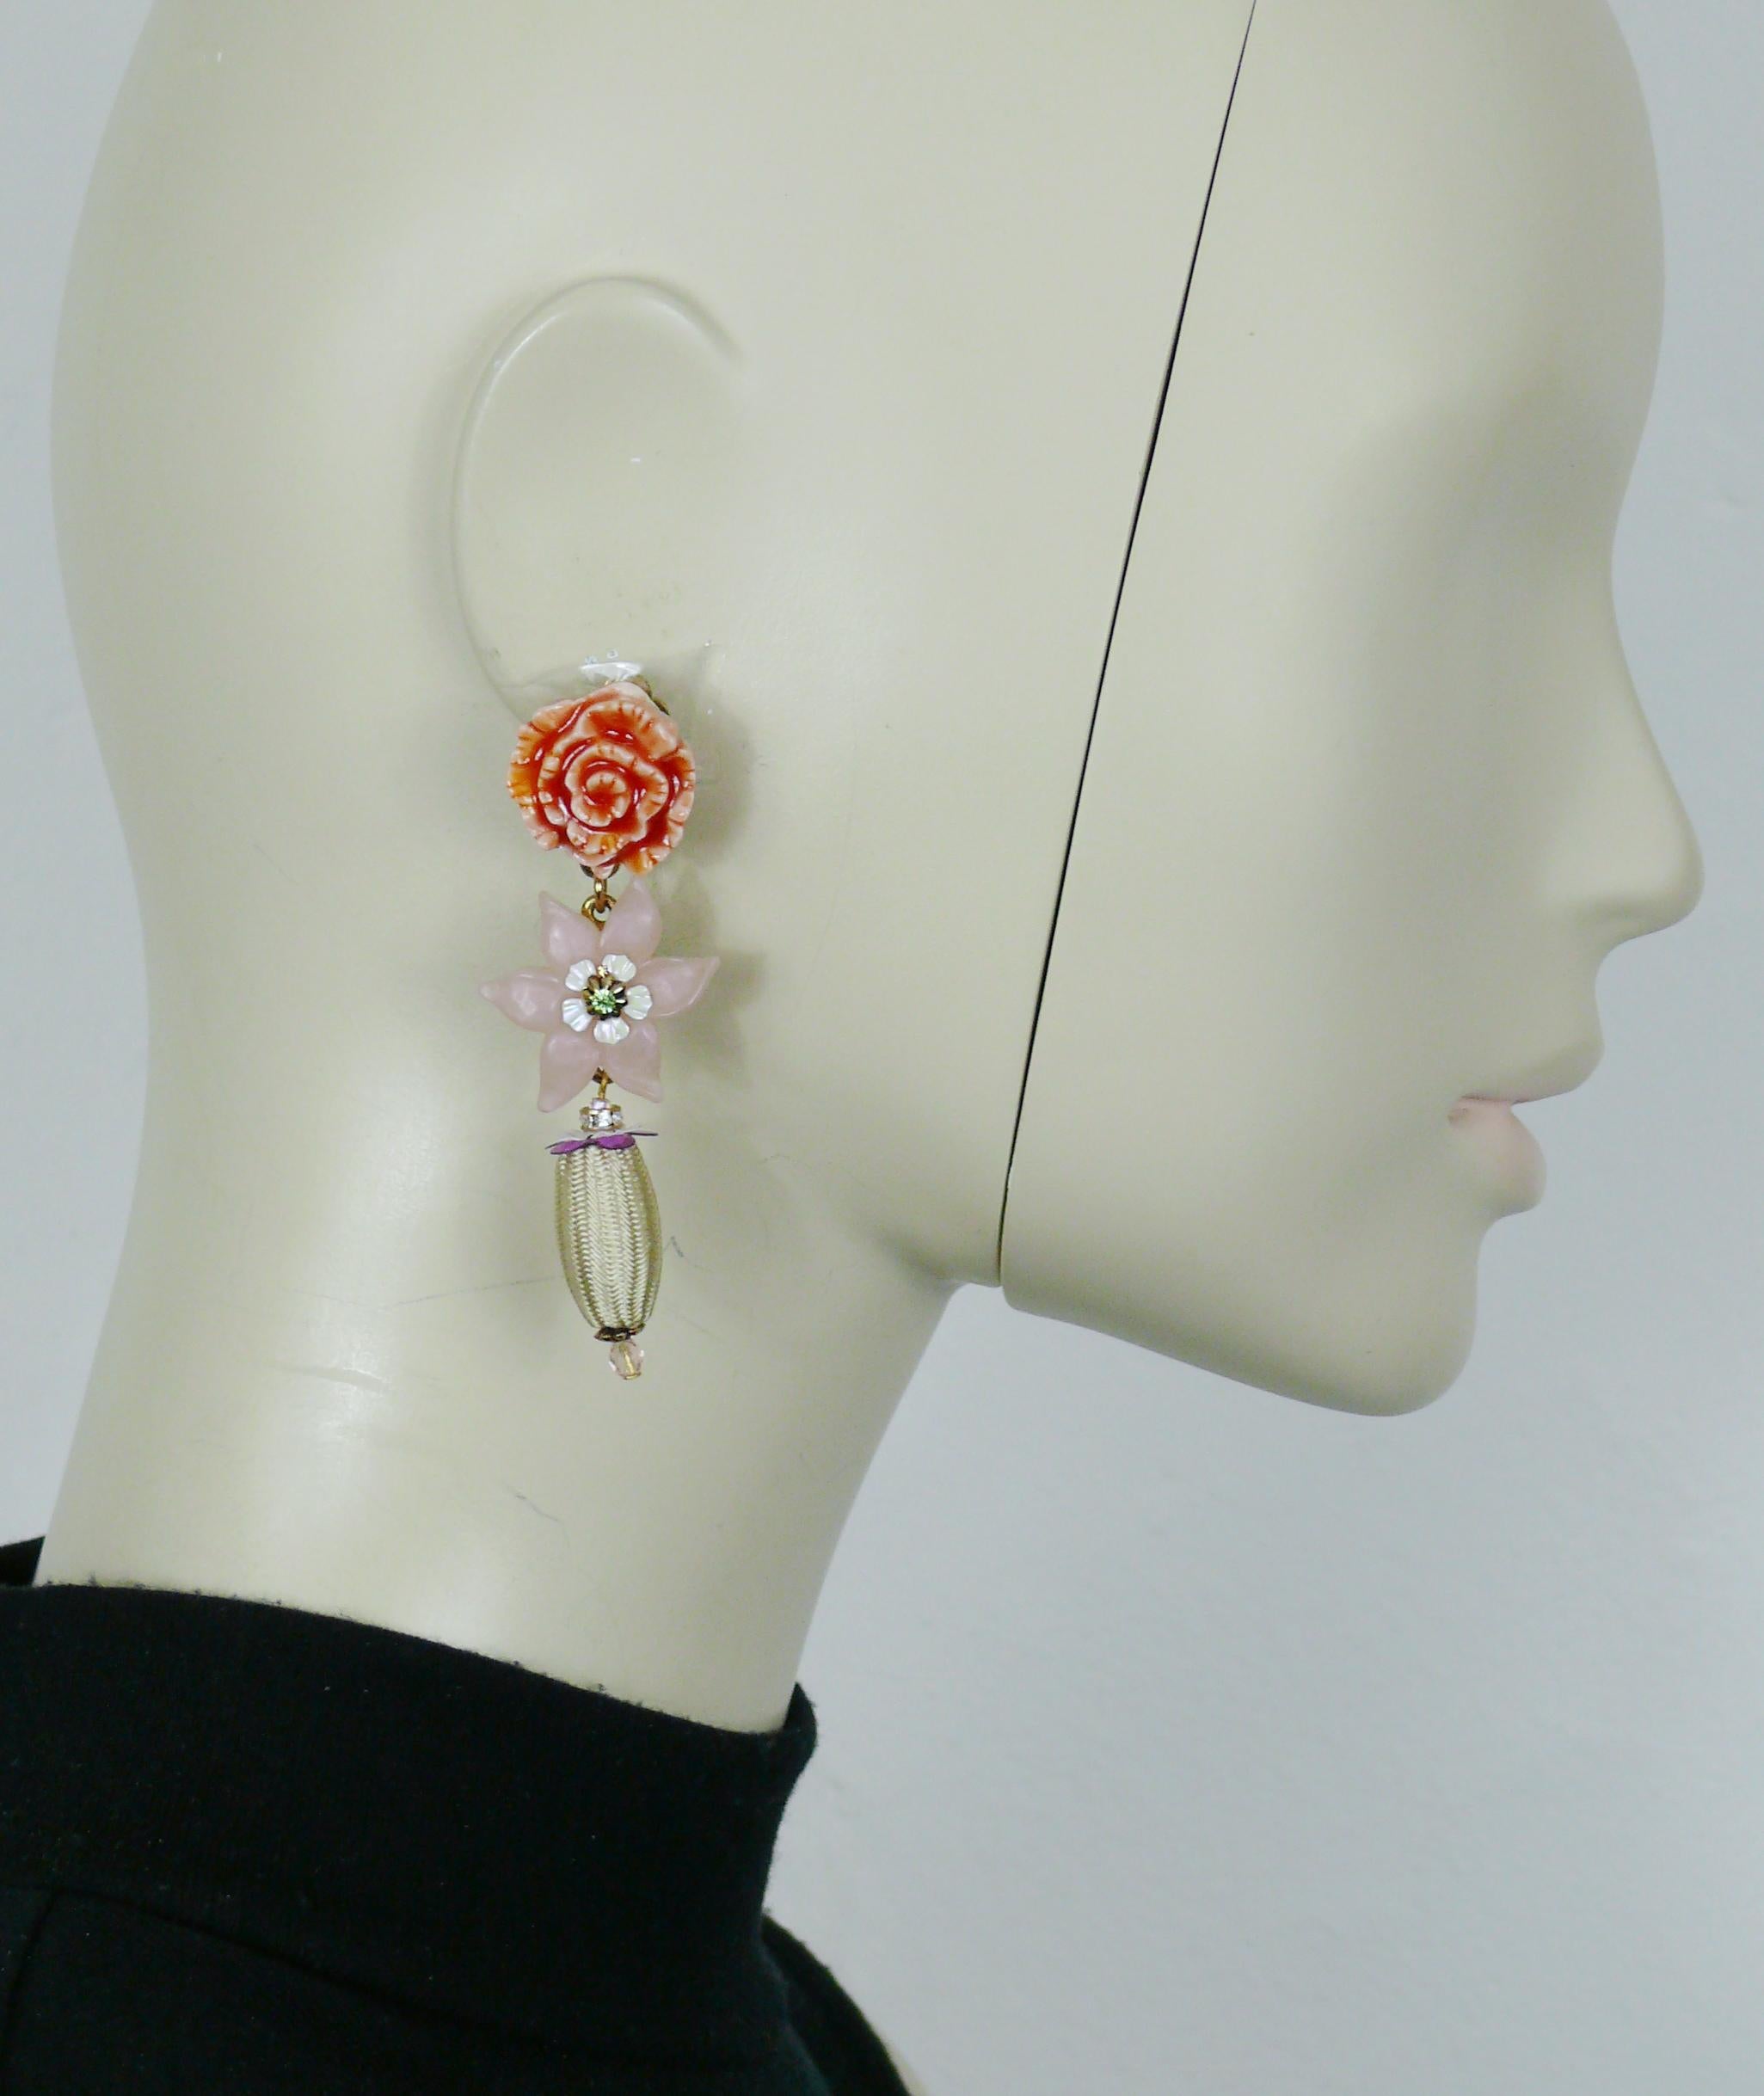 CHRISTIAN LACROIX vintage gold tone floral dangling earrings (clip-on) featuring a a porcelain flower top, a pink iridescent flower embellished with a green crystal and an olive-shaped fabric charm.

Marked CHRISTIAN LACROIX CL Made in